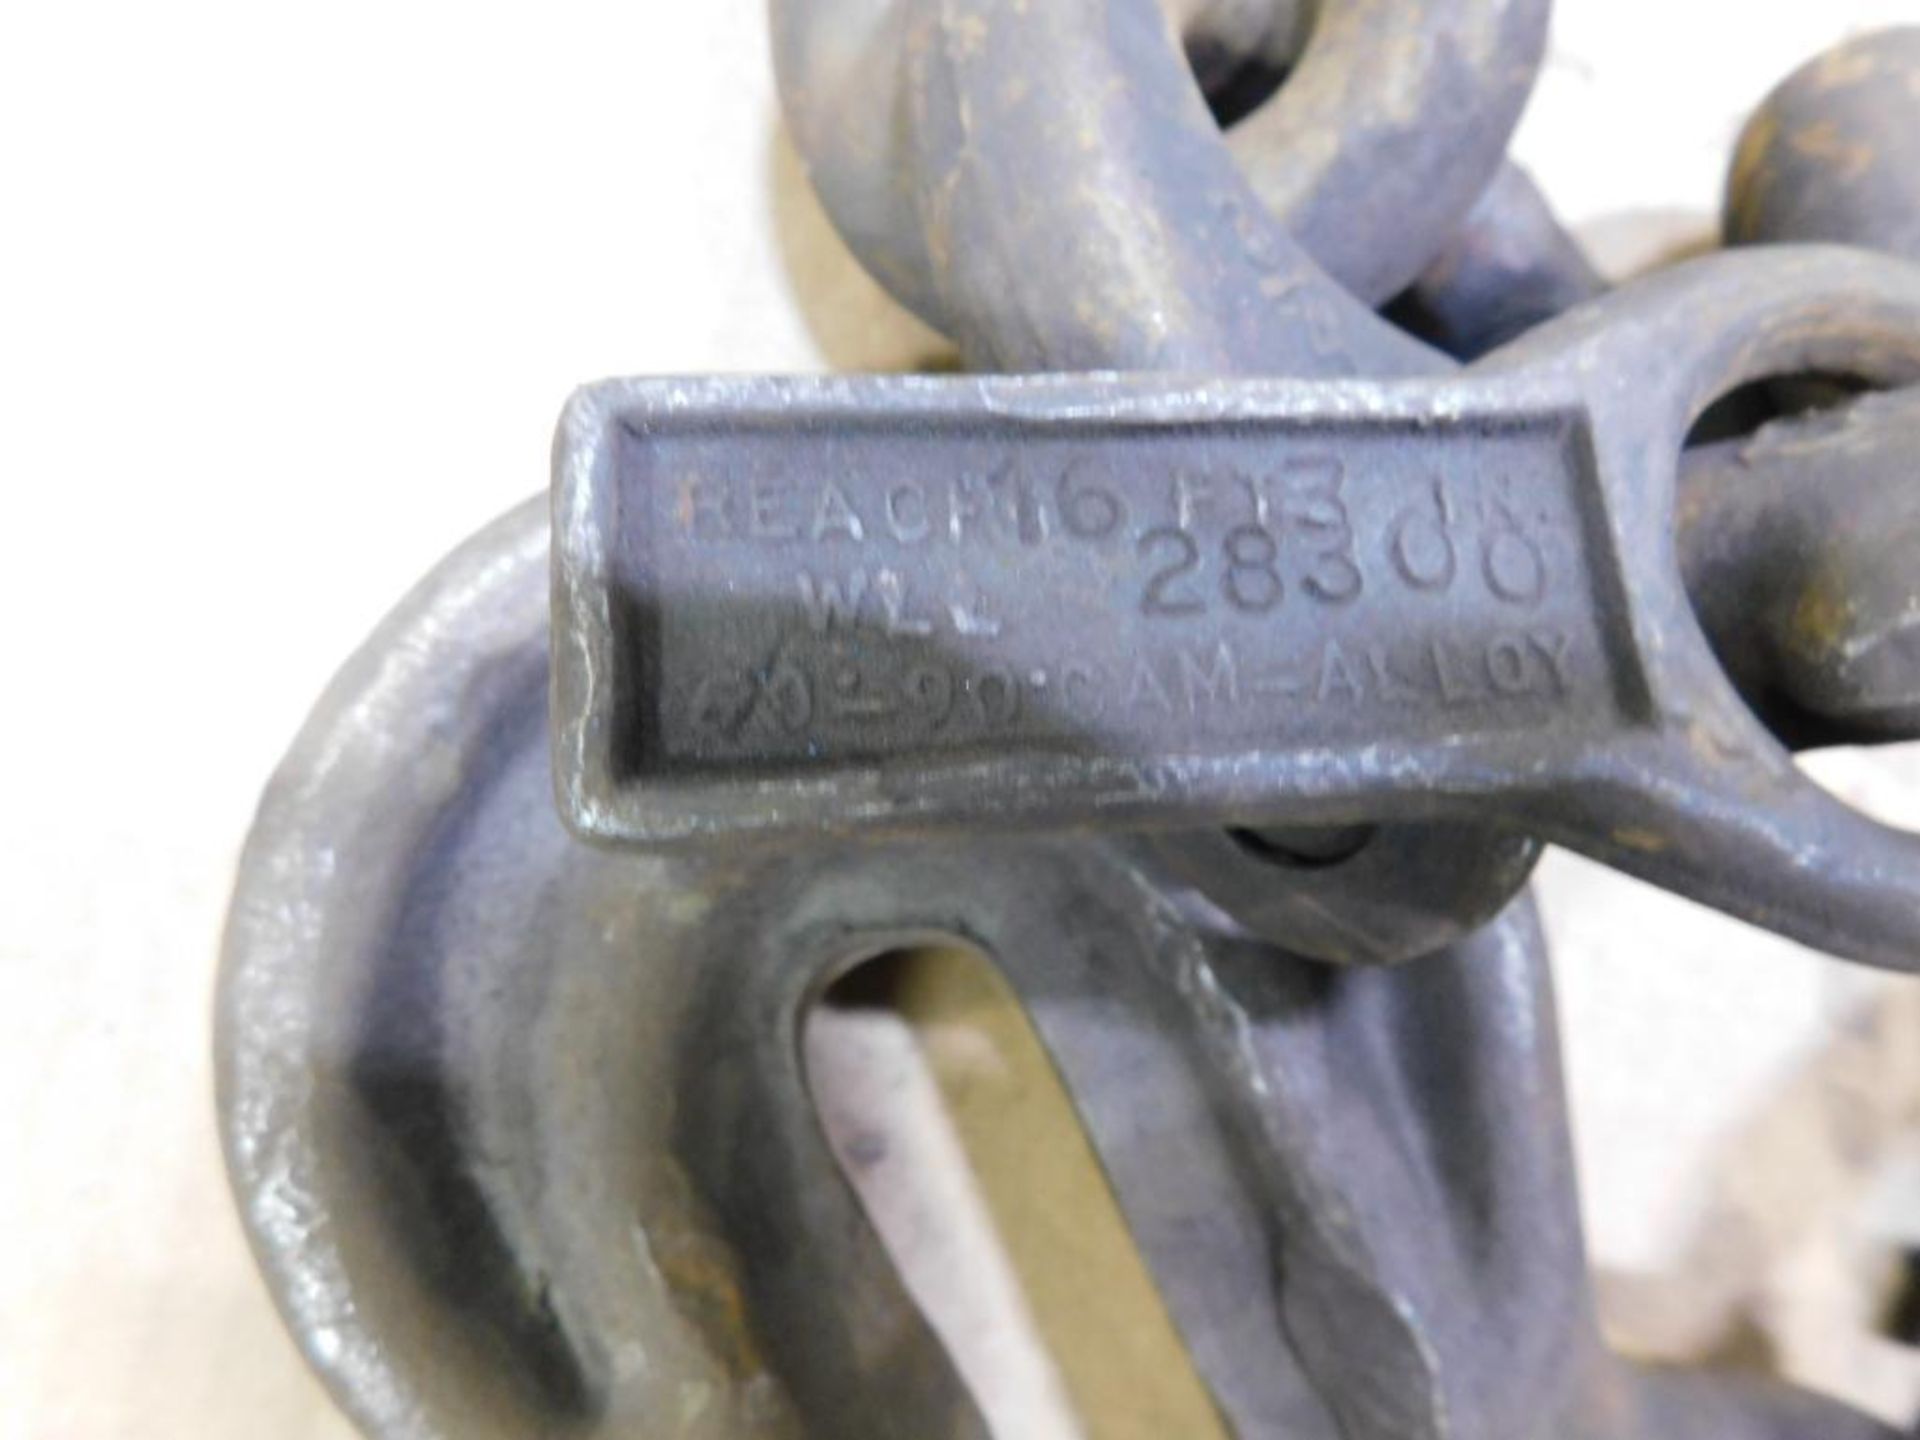 LOT: (1) 28,300 Lb. Double Hook Lifting Chain, 27' Length, Size 3/4", (1) 28,300 Lb. Double Hook Lif - Image 7 of 8